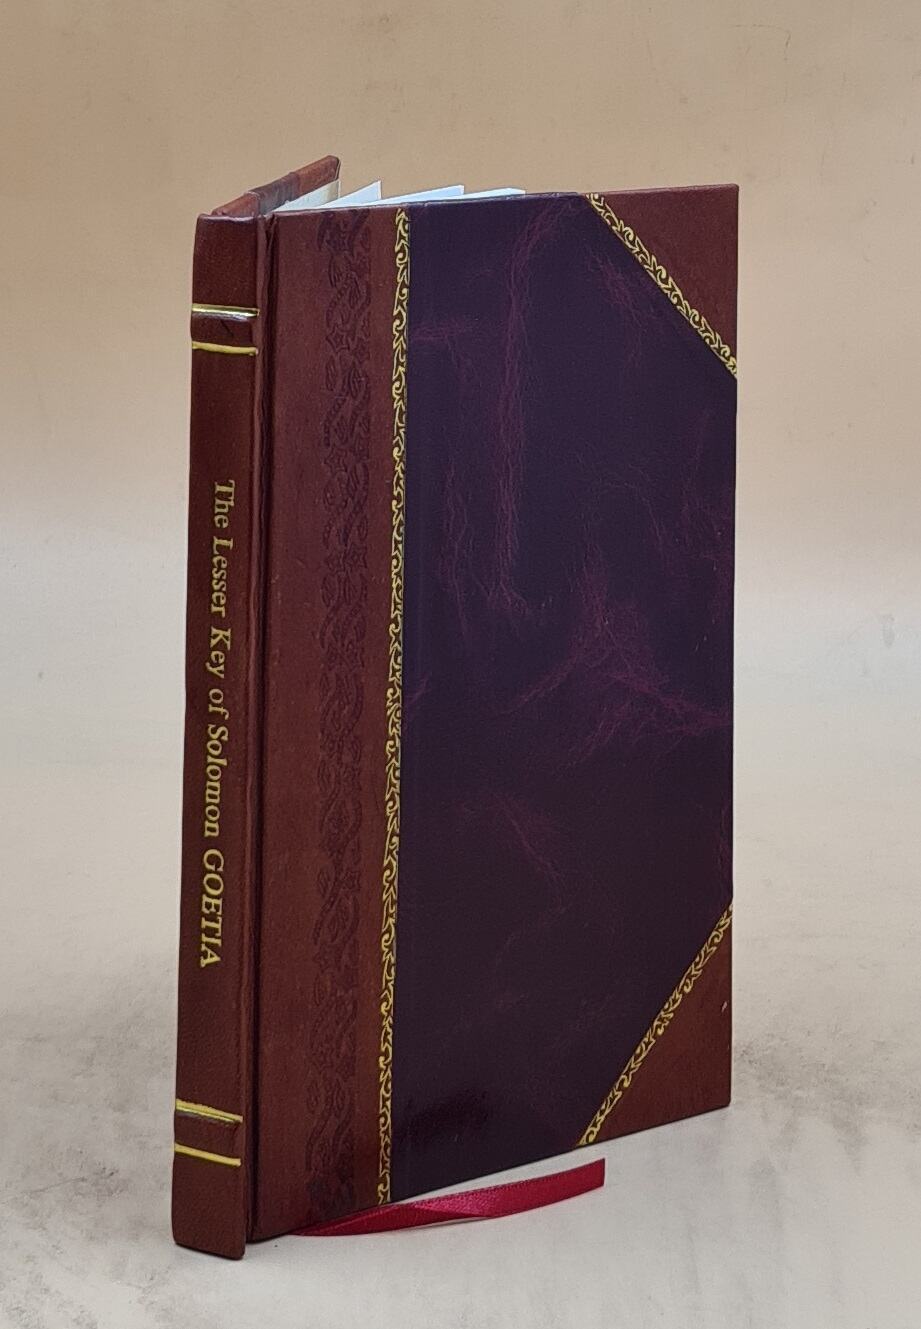 The Lesser Key of Solomon Goetia The Book of Evil Spirits 1916 [LEATHER BOUND]